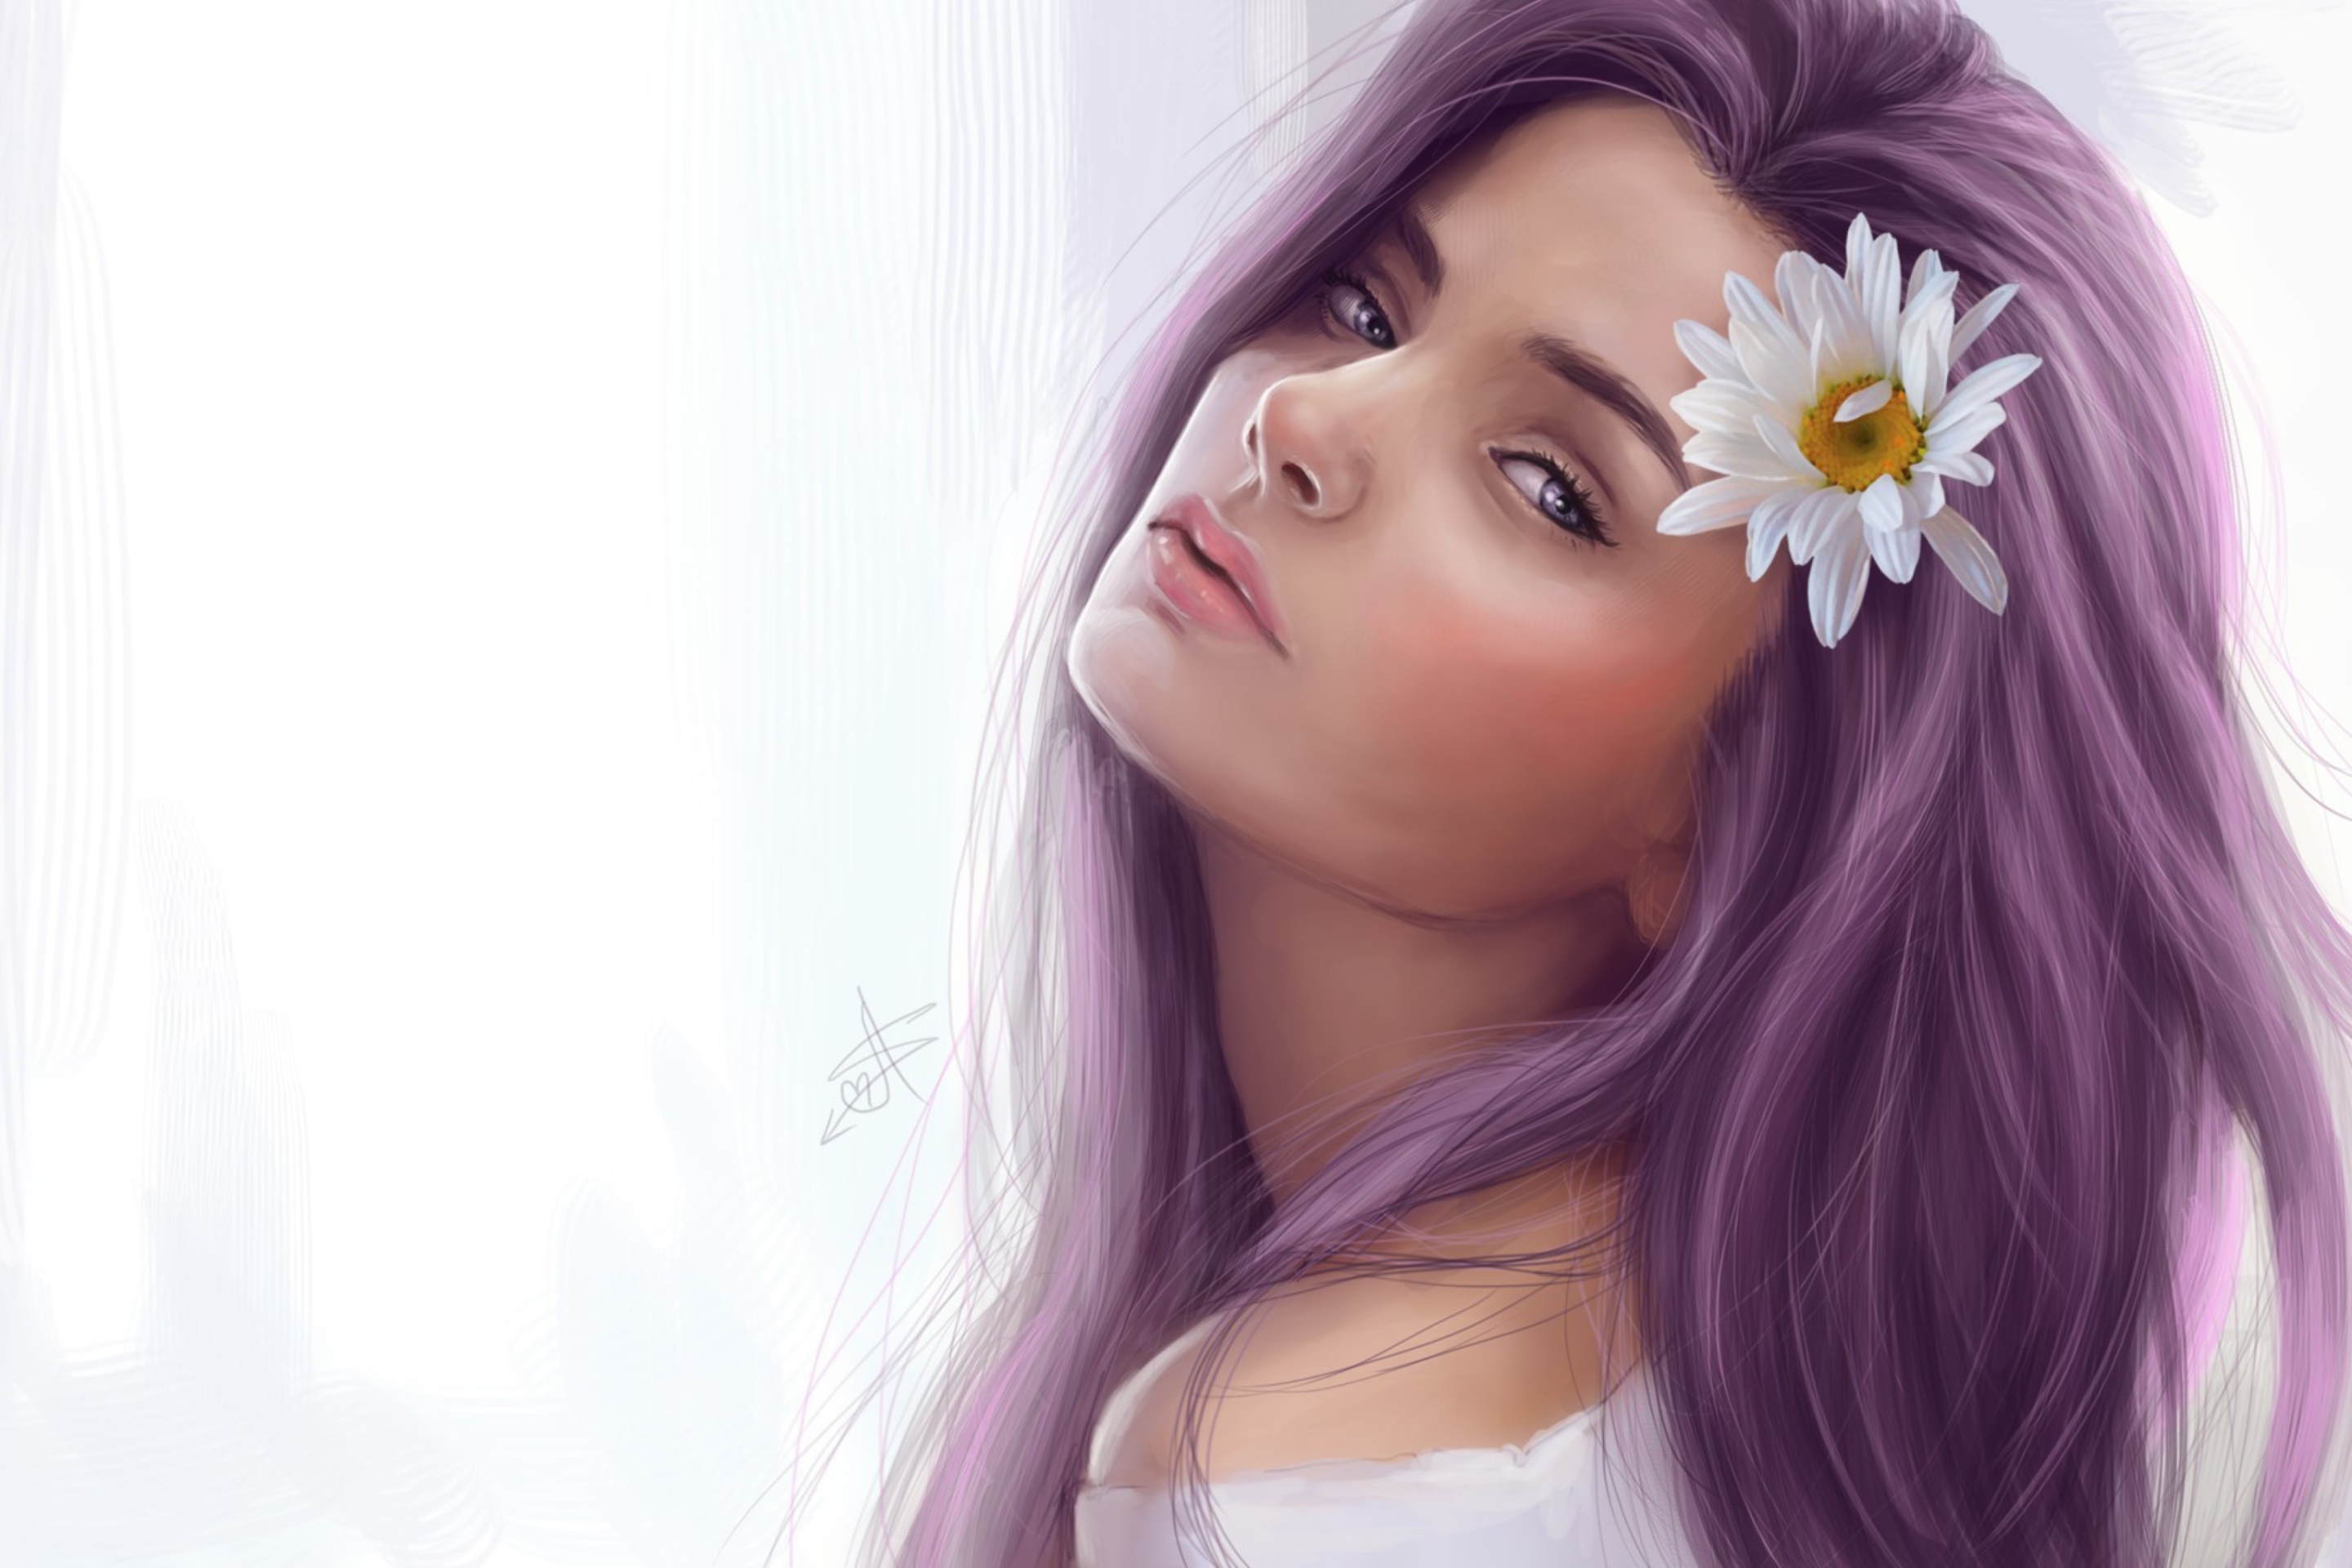 Girl With Purple Hair Painting wallpaper 2880x1920